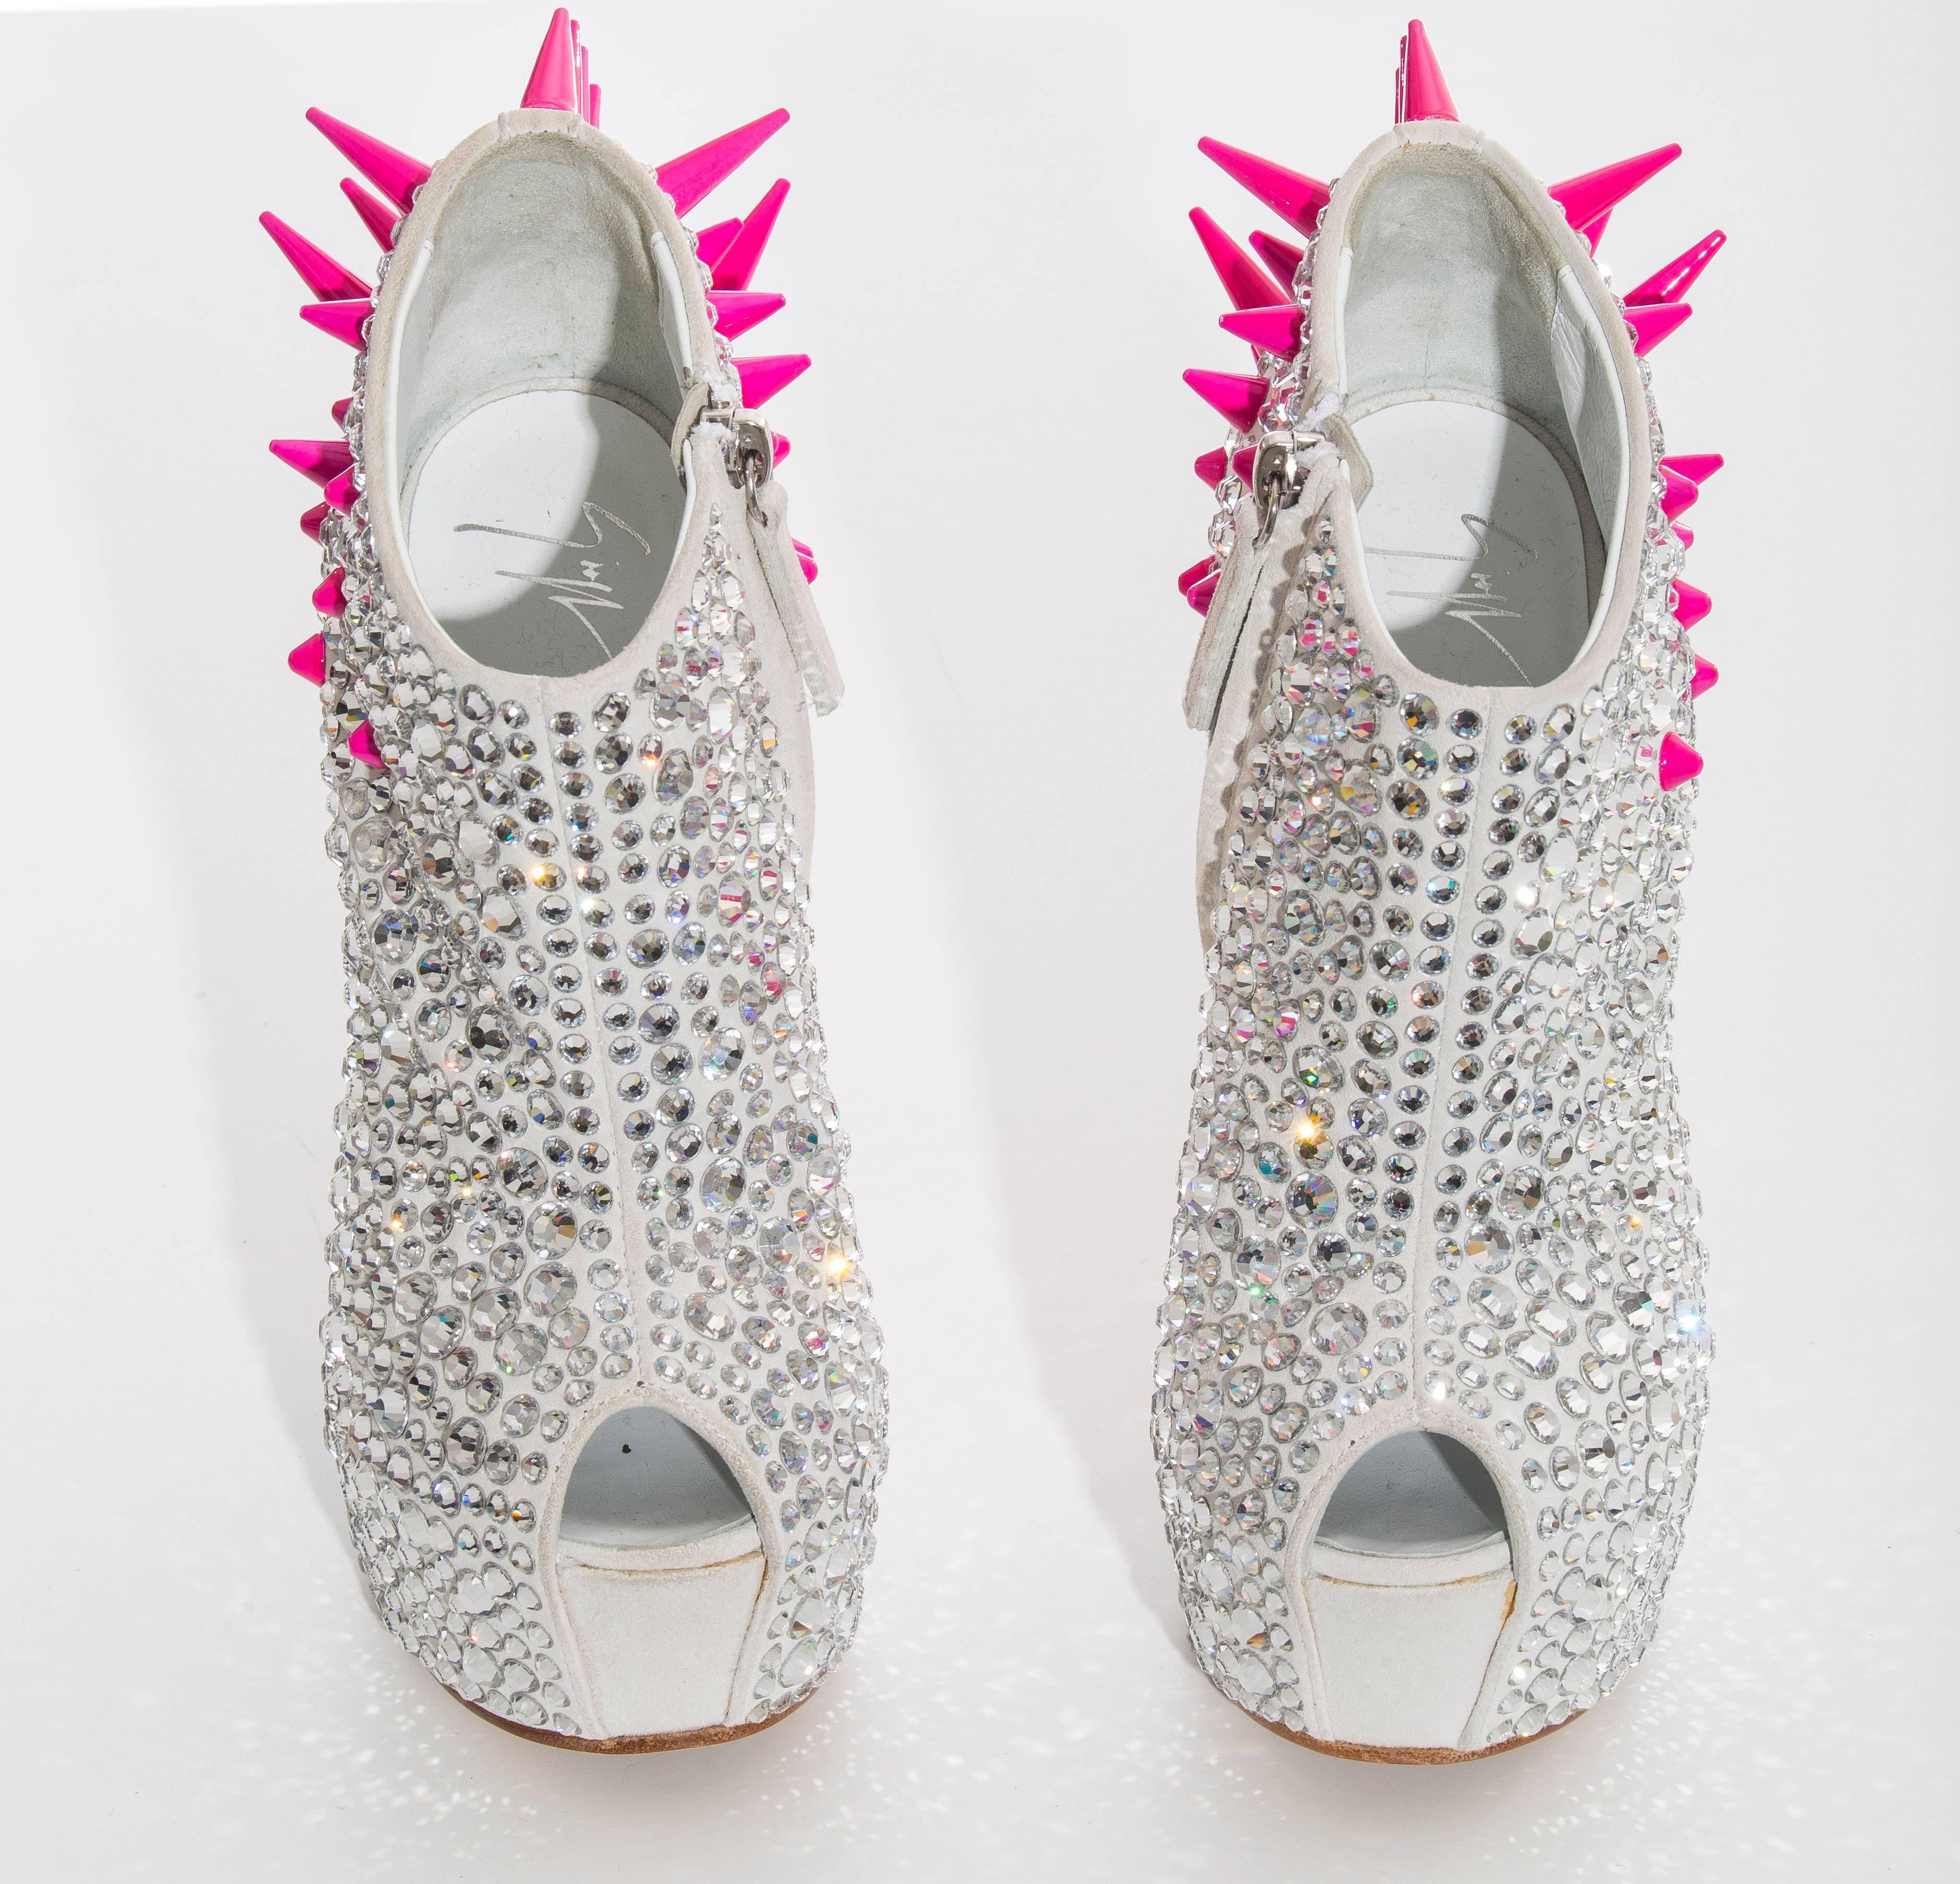 Guiseppe Zanotti Swarovski Crystal & Pink Spiked-Embellished Wedges Fall 2012 In New Condition For Sale In Cincinnati, OH